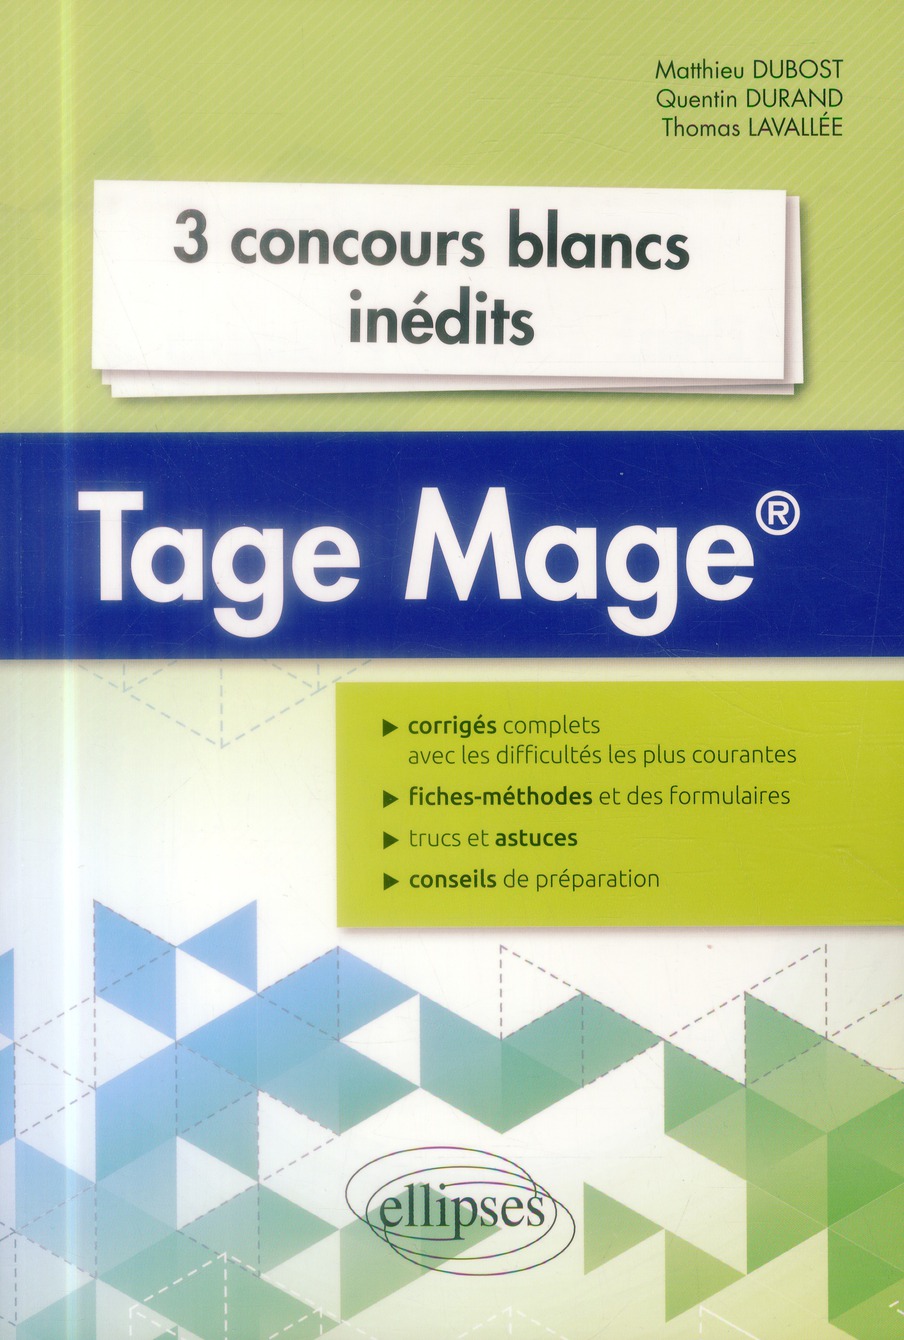 3 CONCOURS BLANCS TAGE MAGE